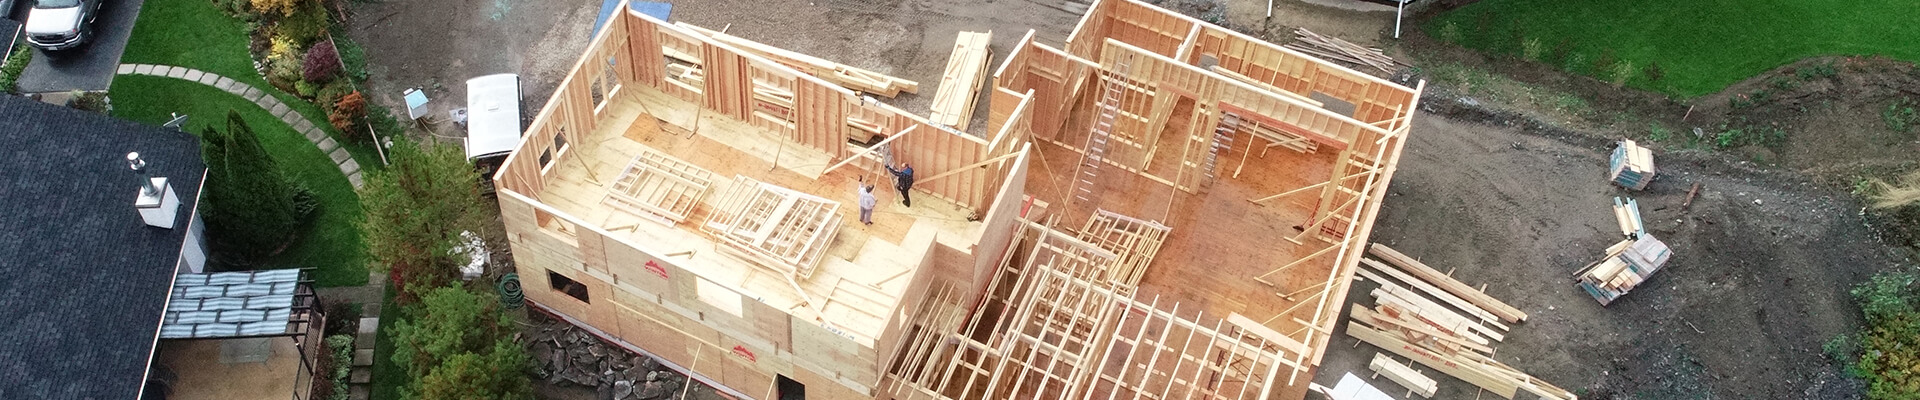 Aerial birds eye view of a home being built